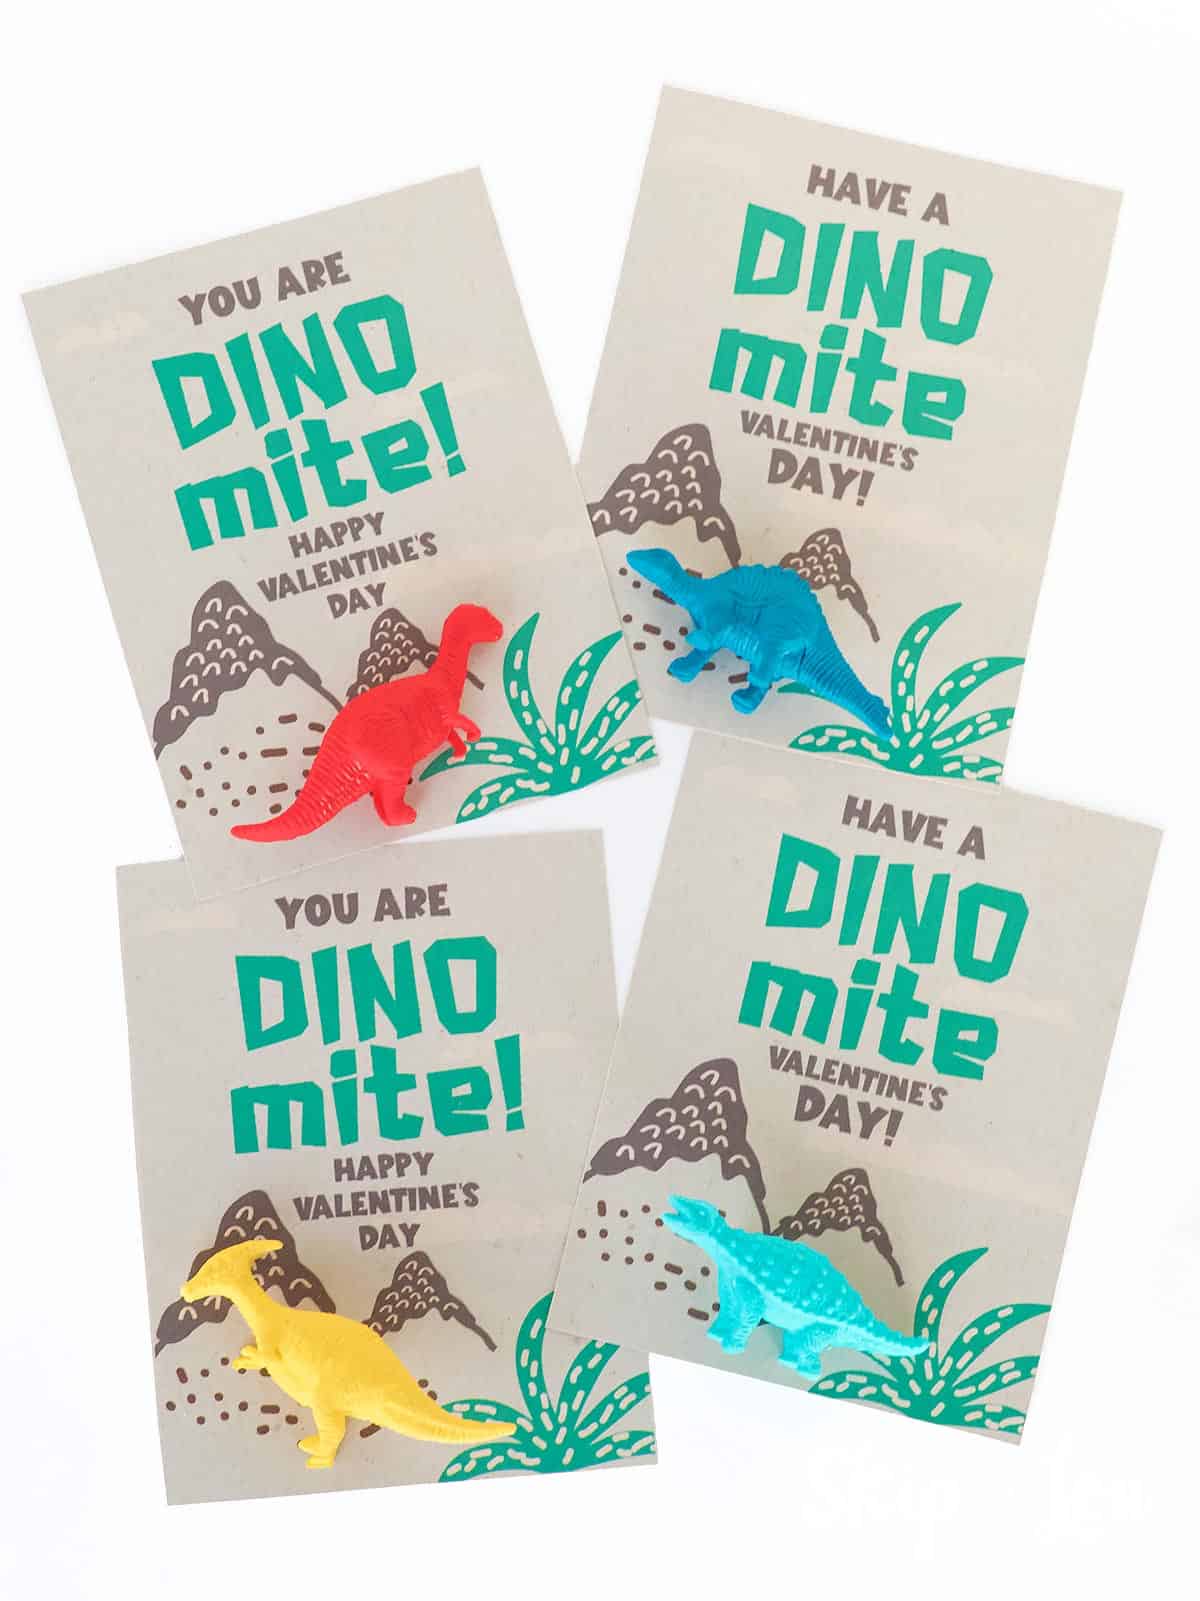 Four cards with Valentine messages saying, "You are Dino mite! Happy Valentine's Day" by Skip to my Lou.